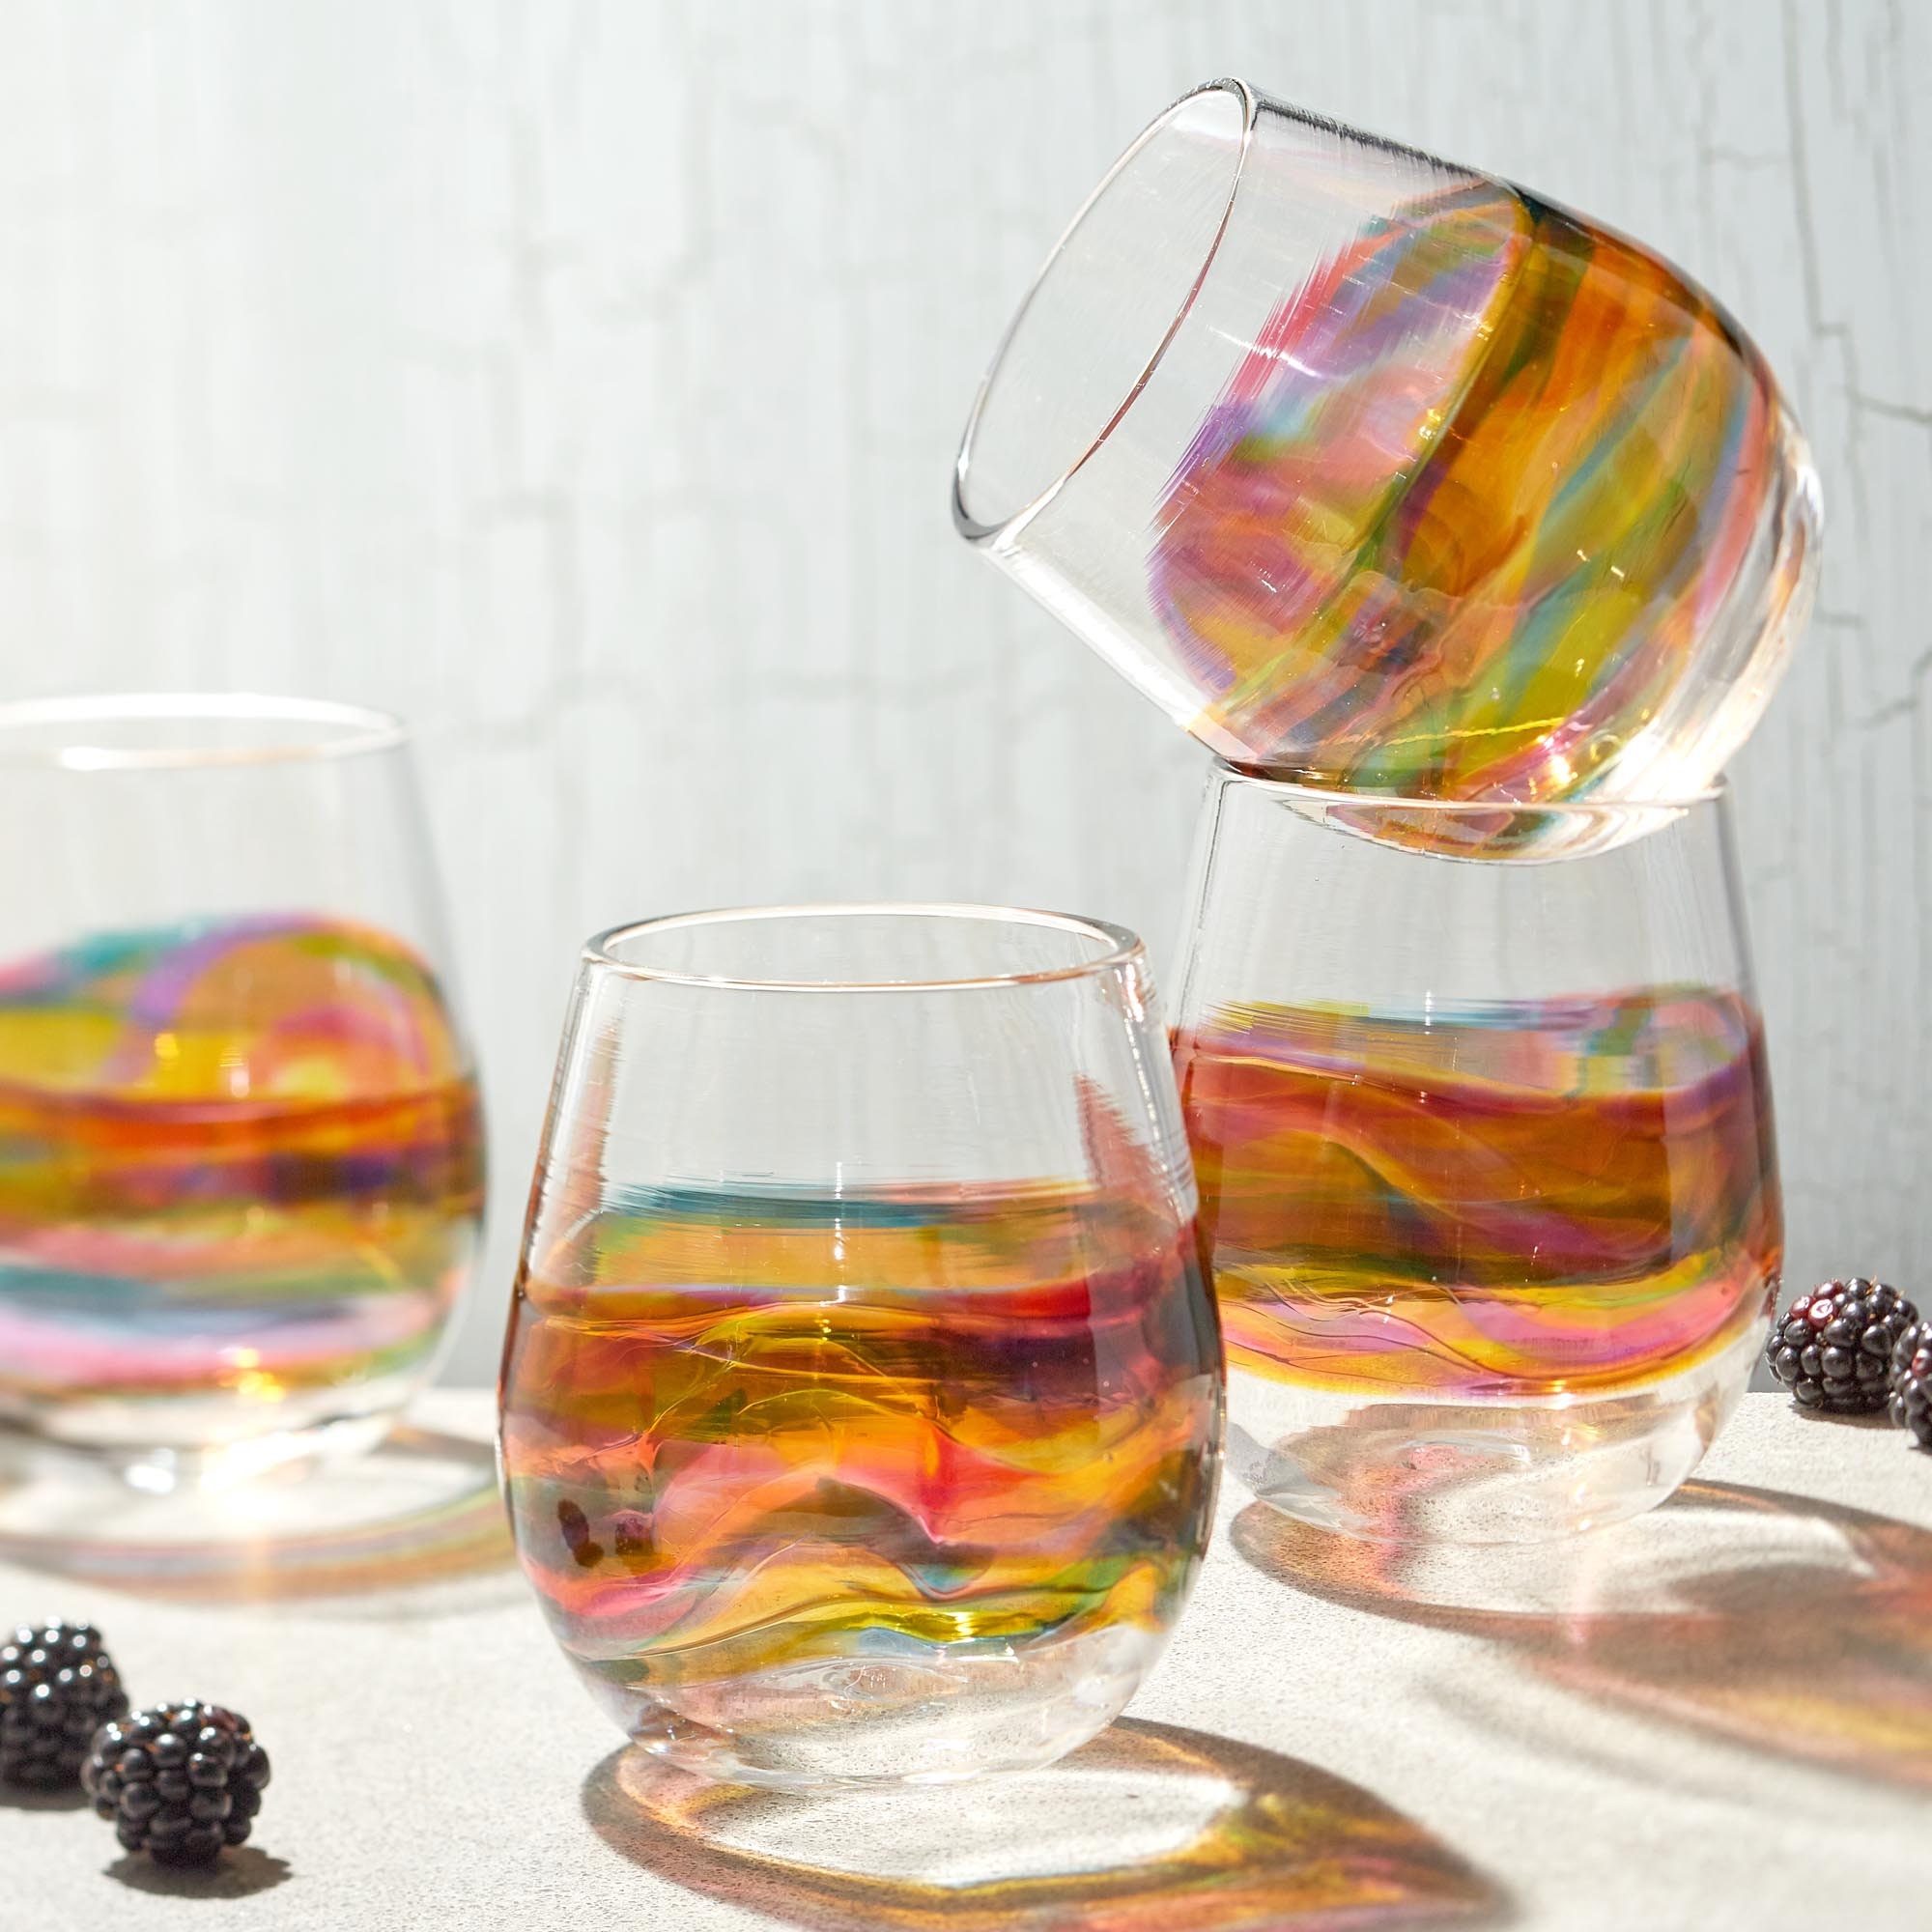 Stemless Wine Glasses for Cocktails, Wine, or Sangria. Handmade Hand Blown  Glassware, Barware, and Glass Sets. Made to Order From USA. 